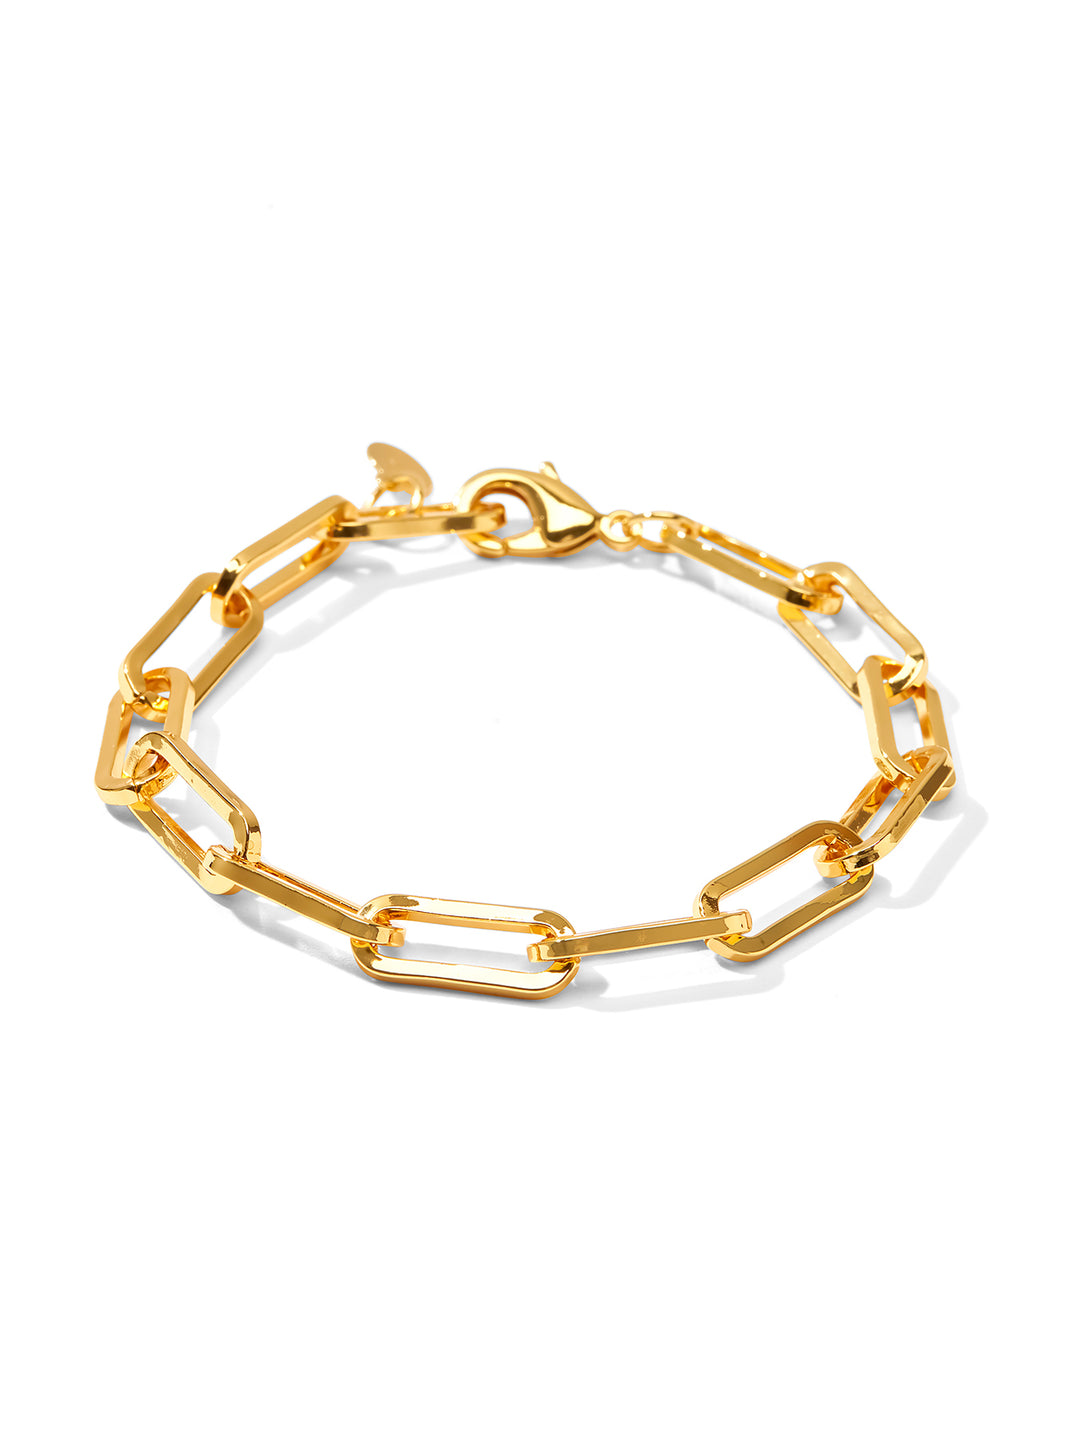 BICYCLE BRACELET • Color: 18K Yellow Gold